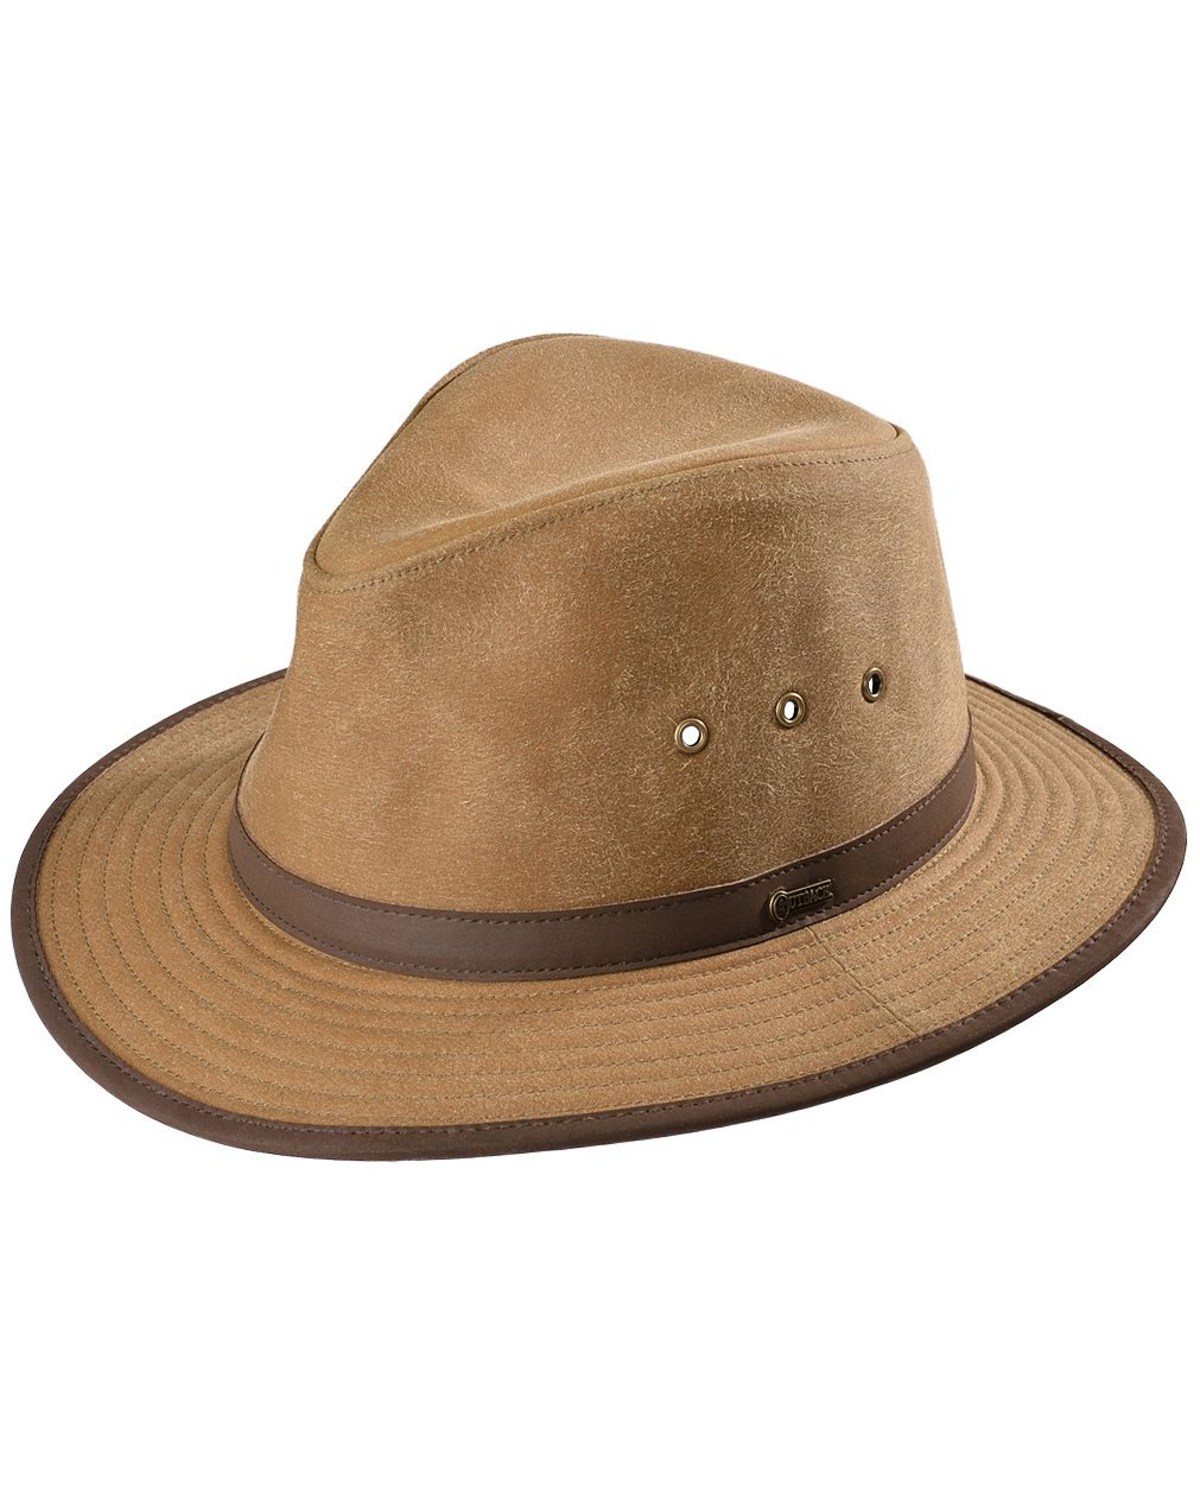 Outback Trading Co. Tan Madison River UPF50 Sun Protection Oilskin Hat ...